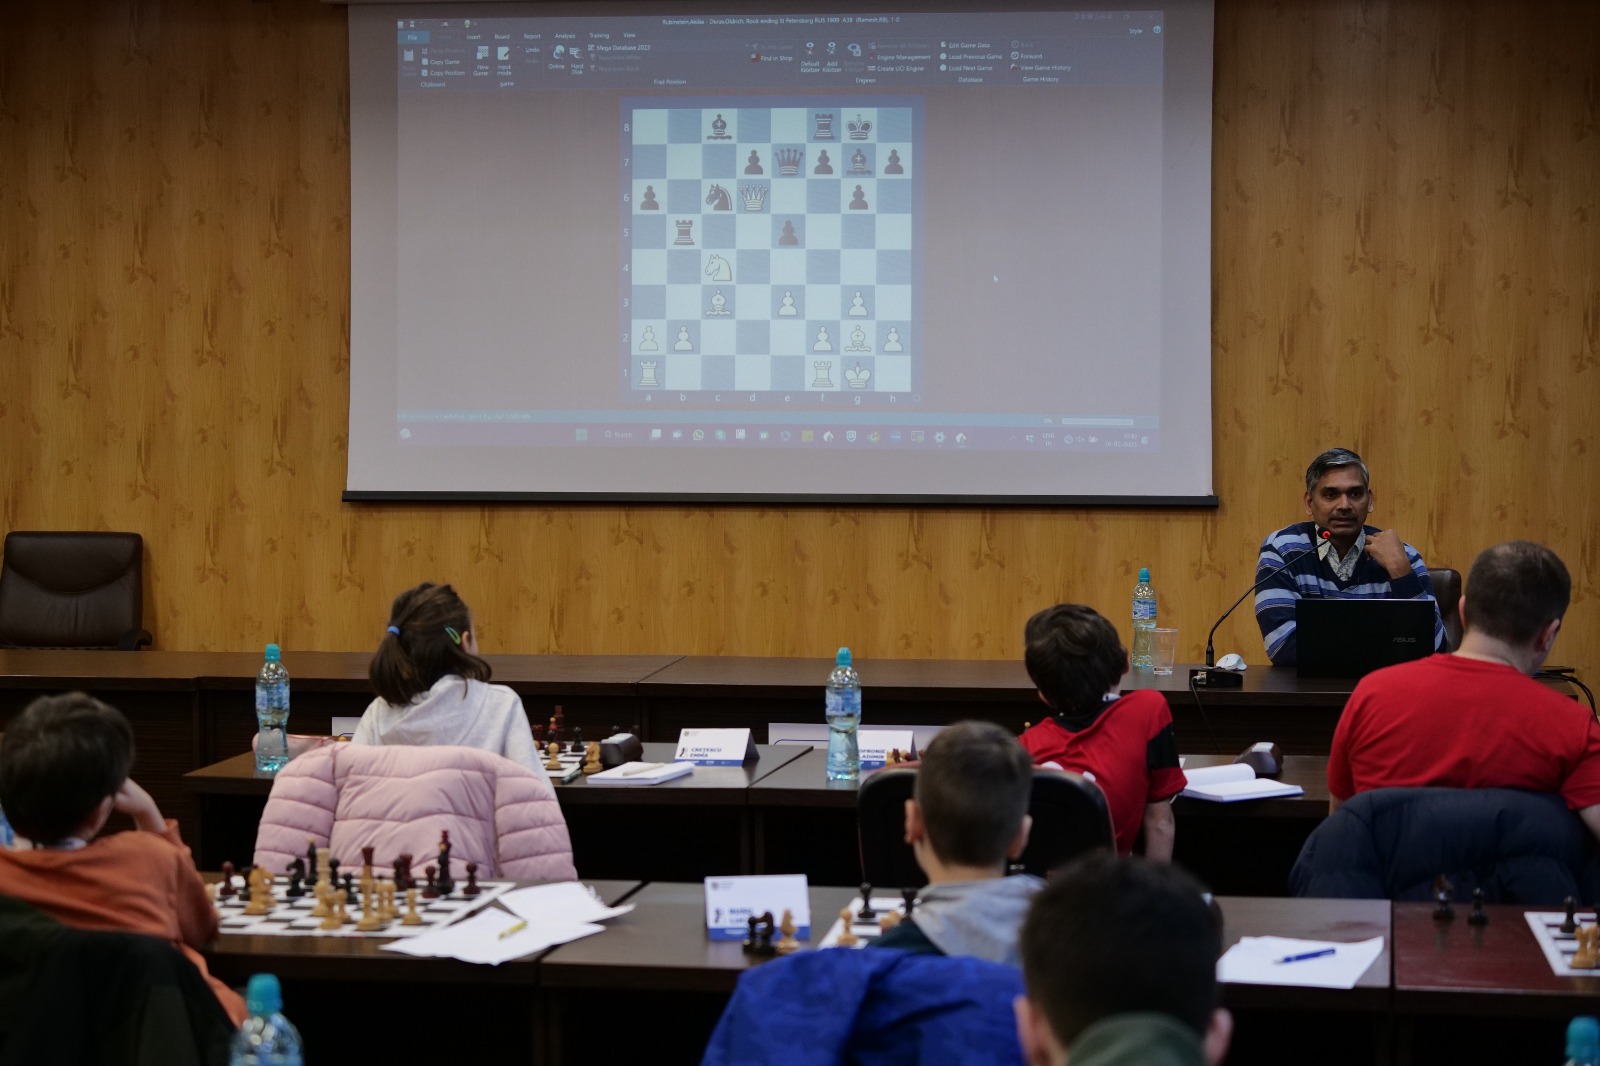 ELITE GROUP TRAINING CAMP OF THE NATIONAL JUNIOR TEAM IN CHESS